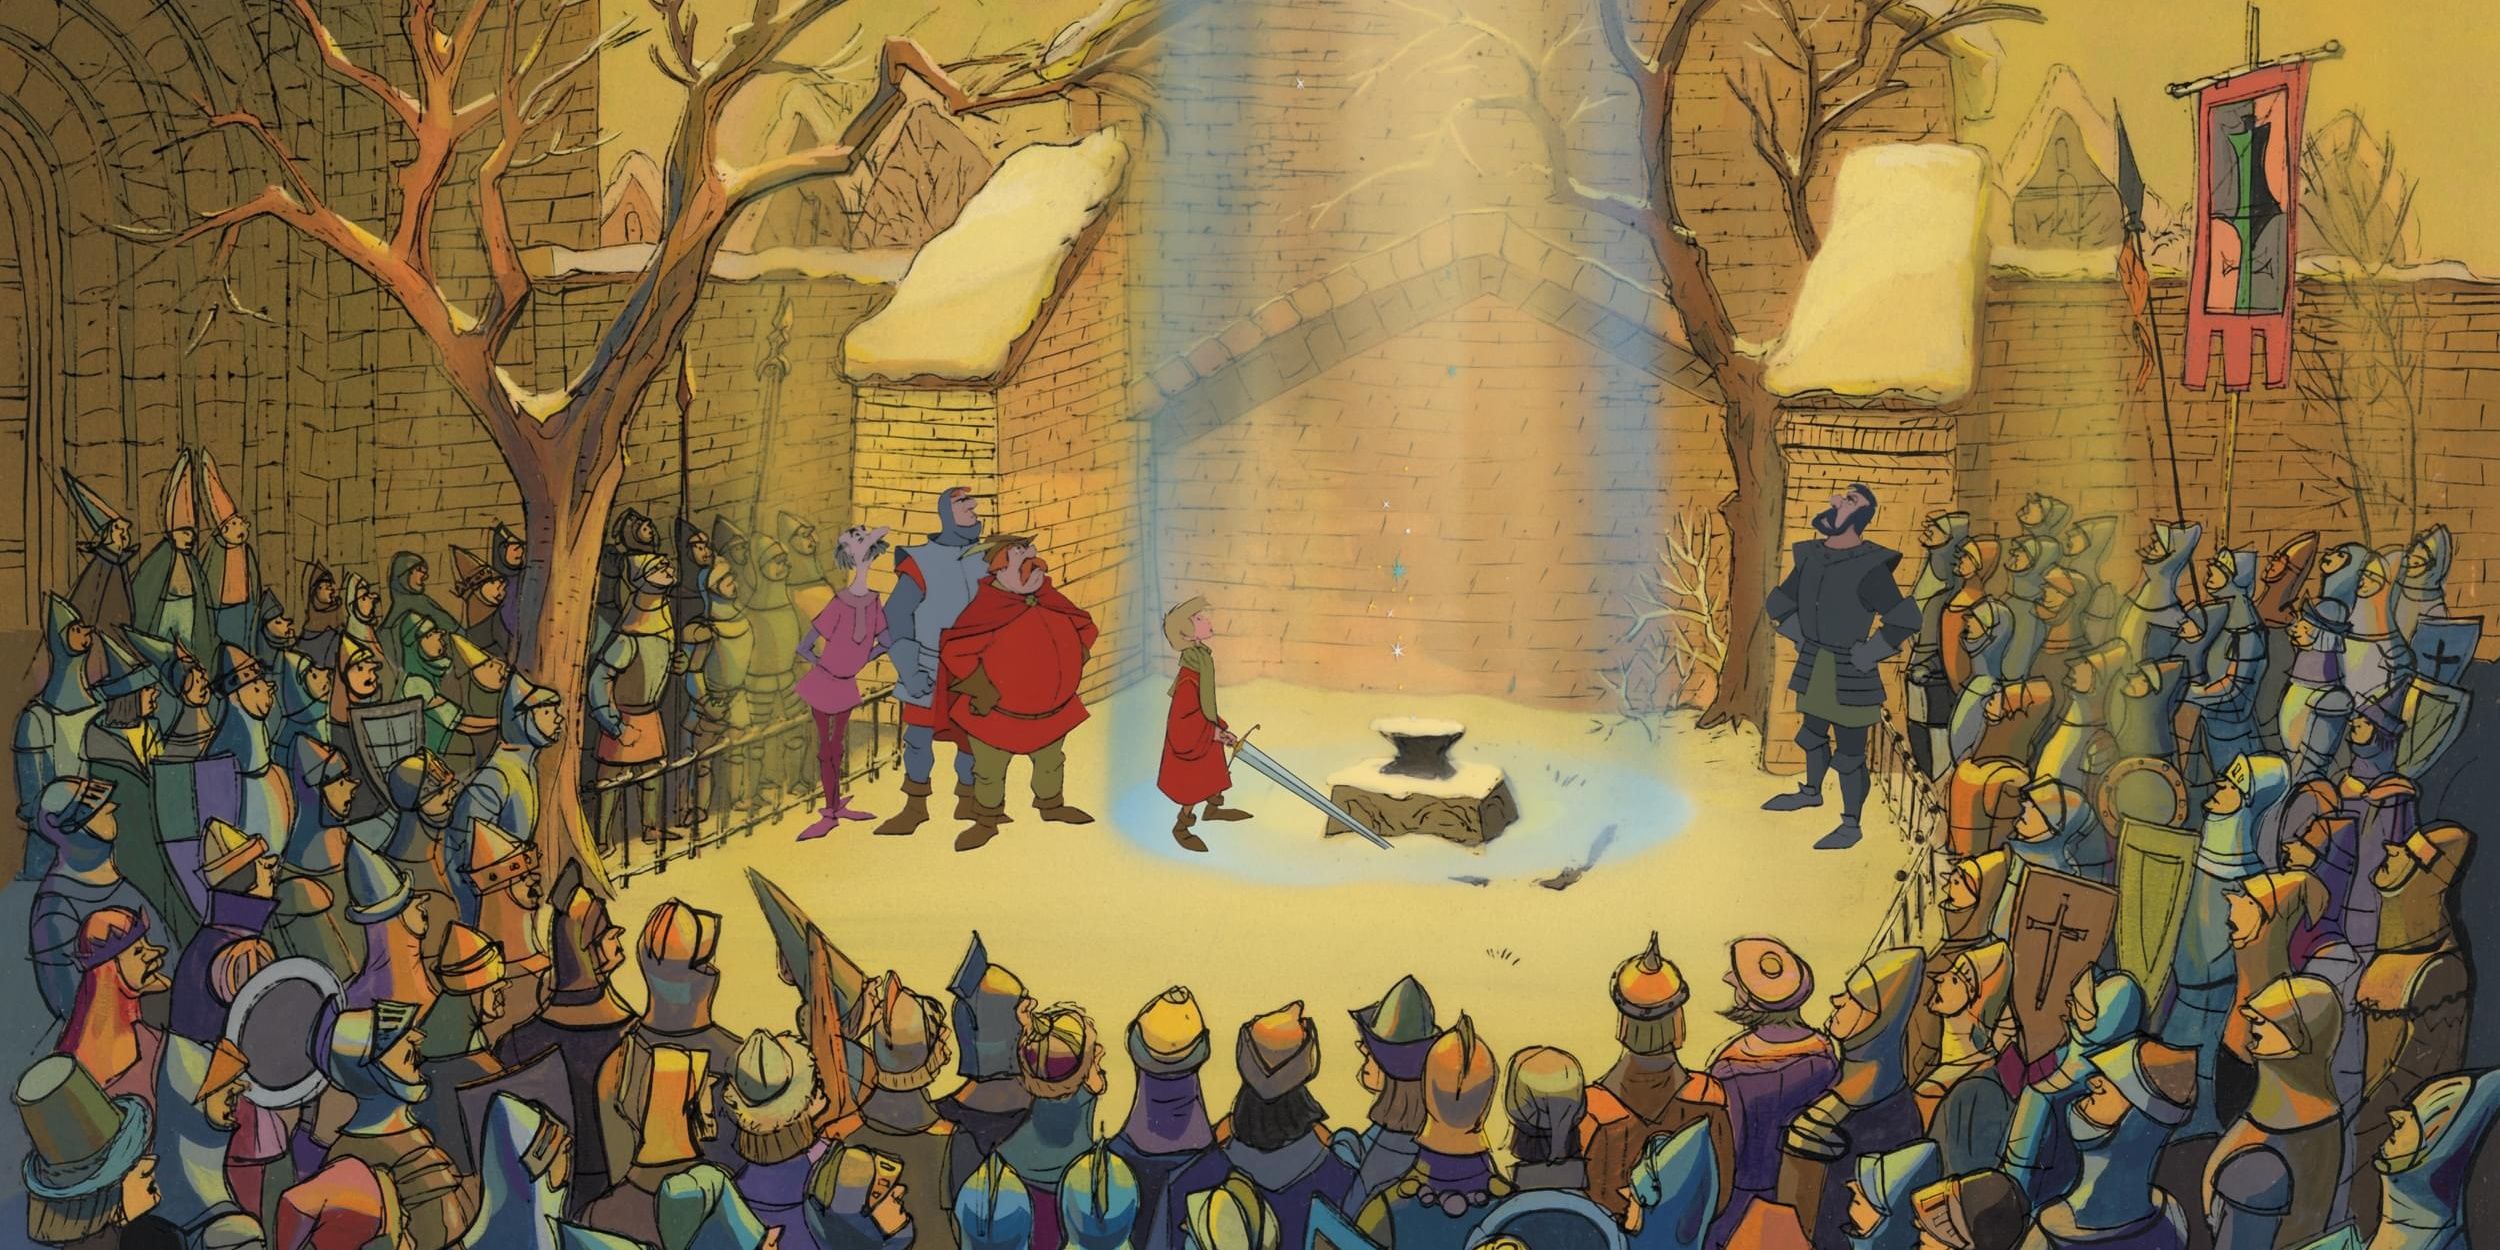 People gathered in a crowd in The Sword in the Stone